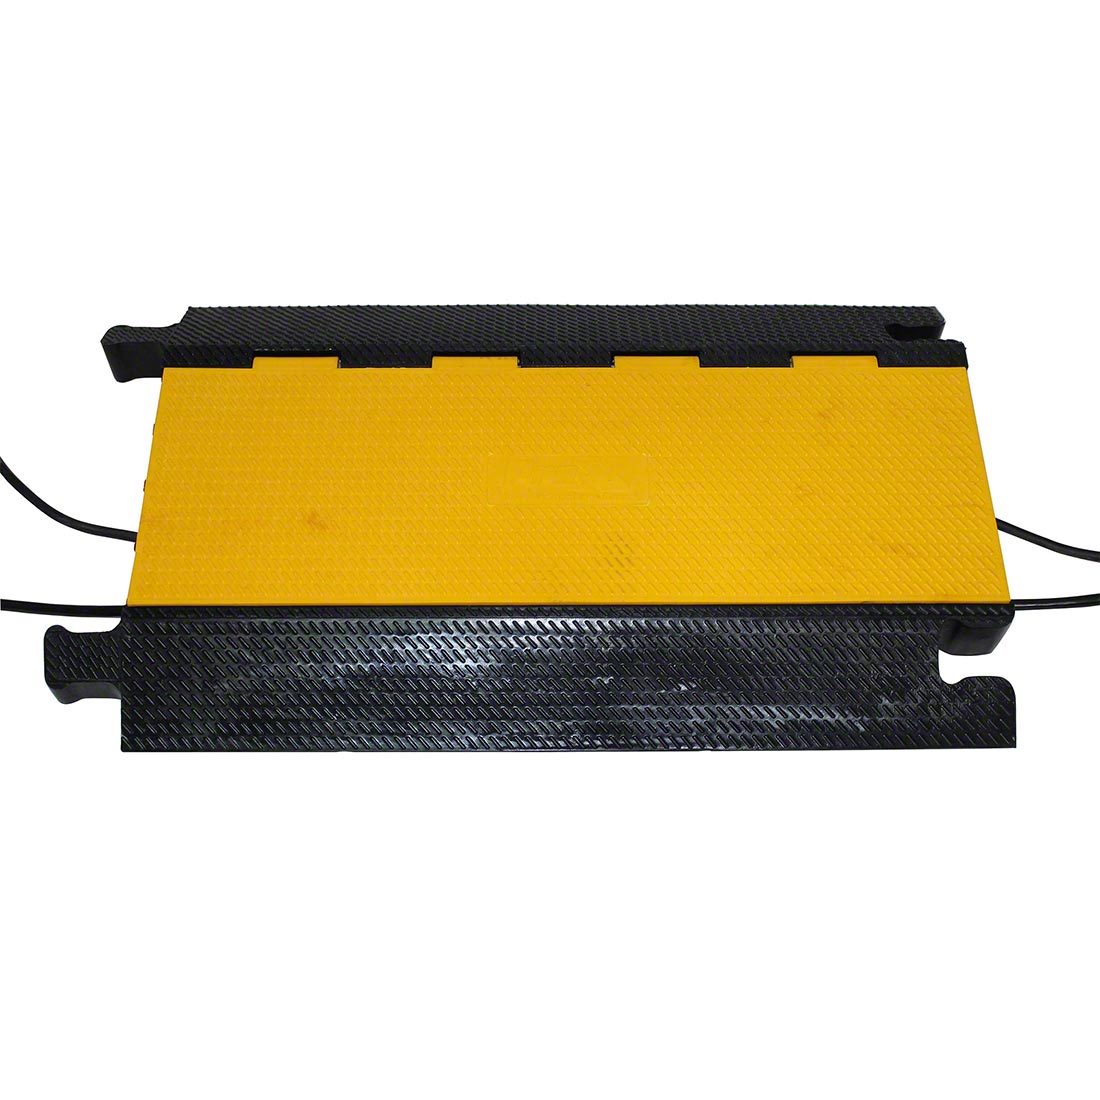 Cable Protectors, Cable Ramps